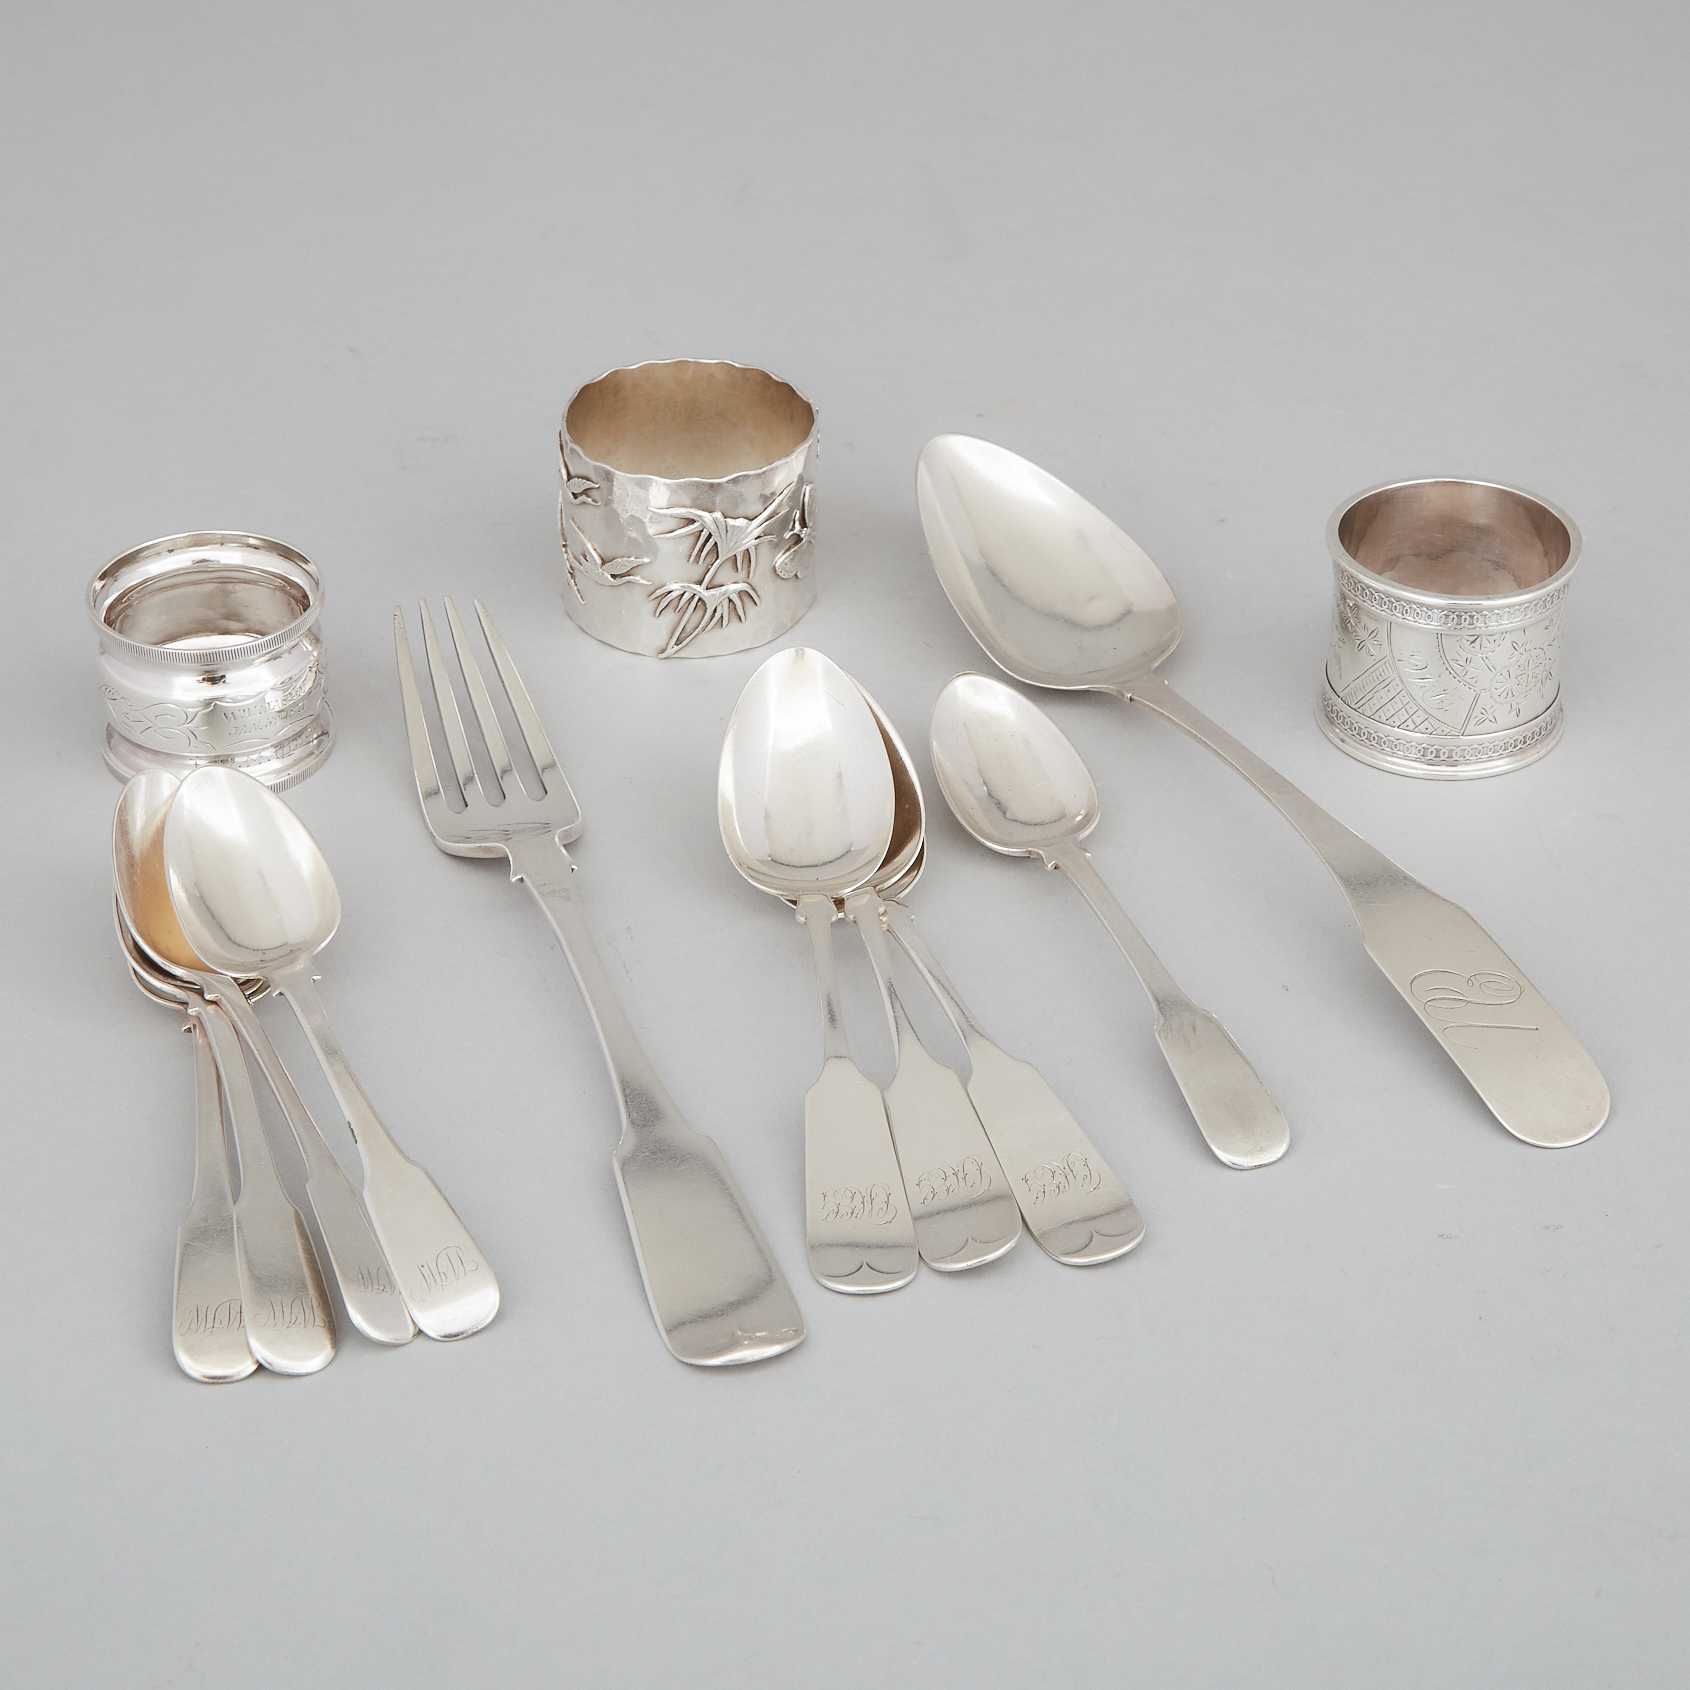 American Silver Napkin Ring, George Shiebler & Co. New York, N.Y., 1880s, together with Two Others and Ten Pieces of Fiddle Pattern Flatware, 19th century